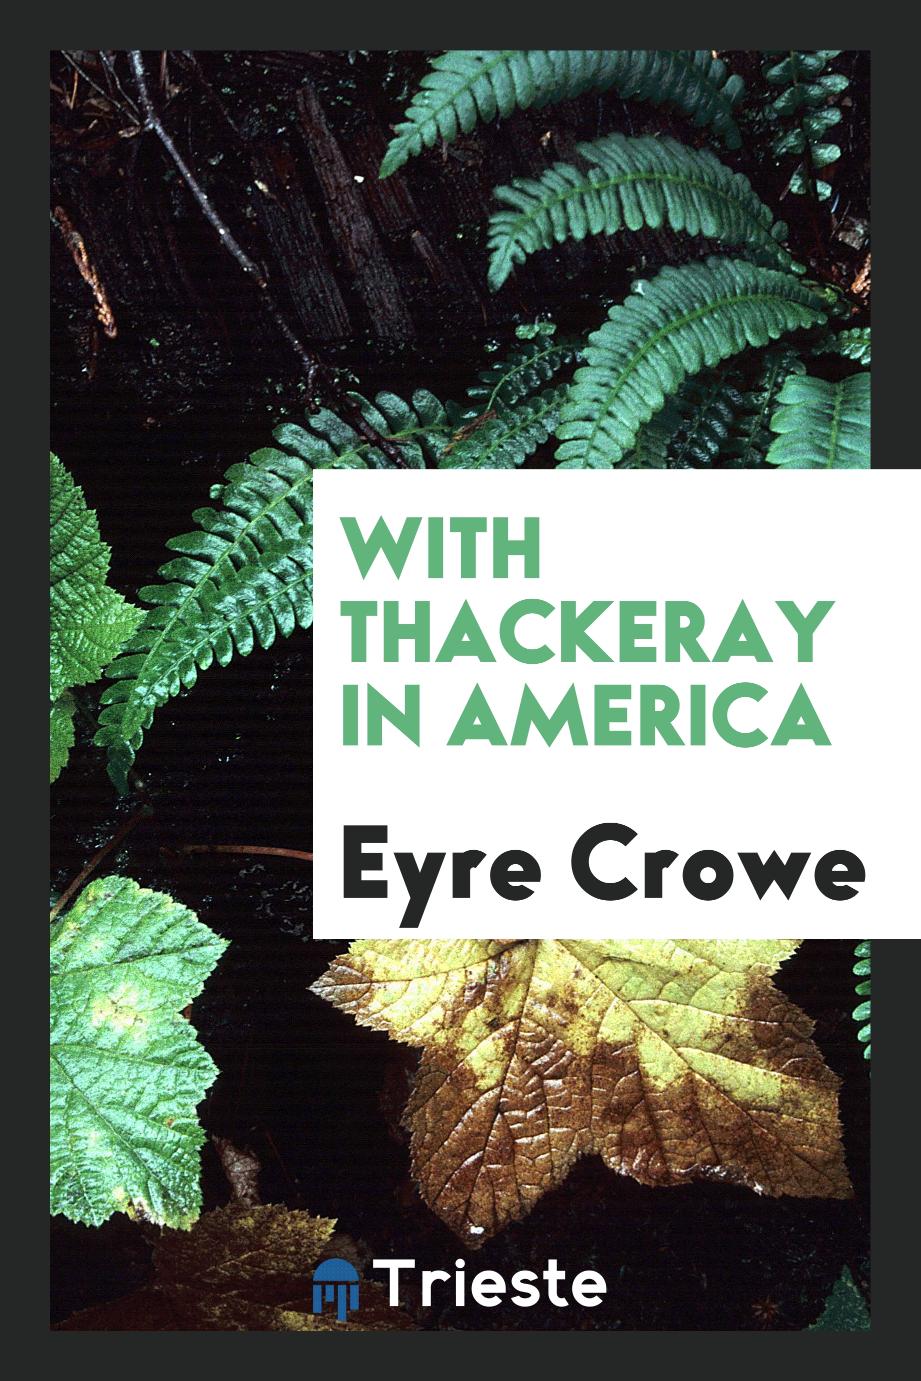 Eyre Crowe - With Thackeray in America